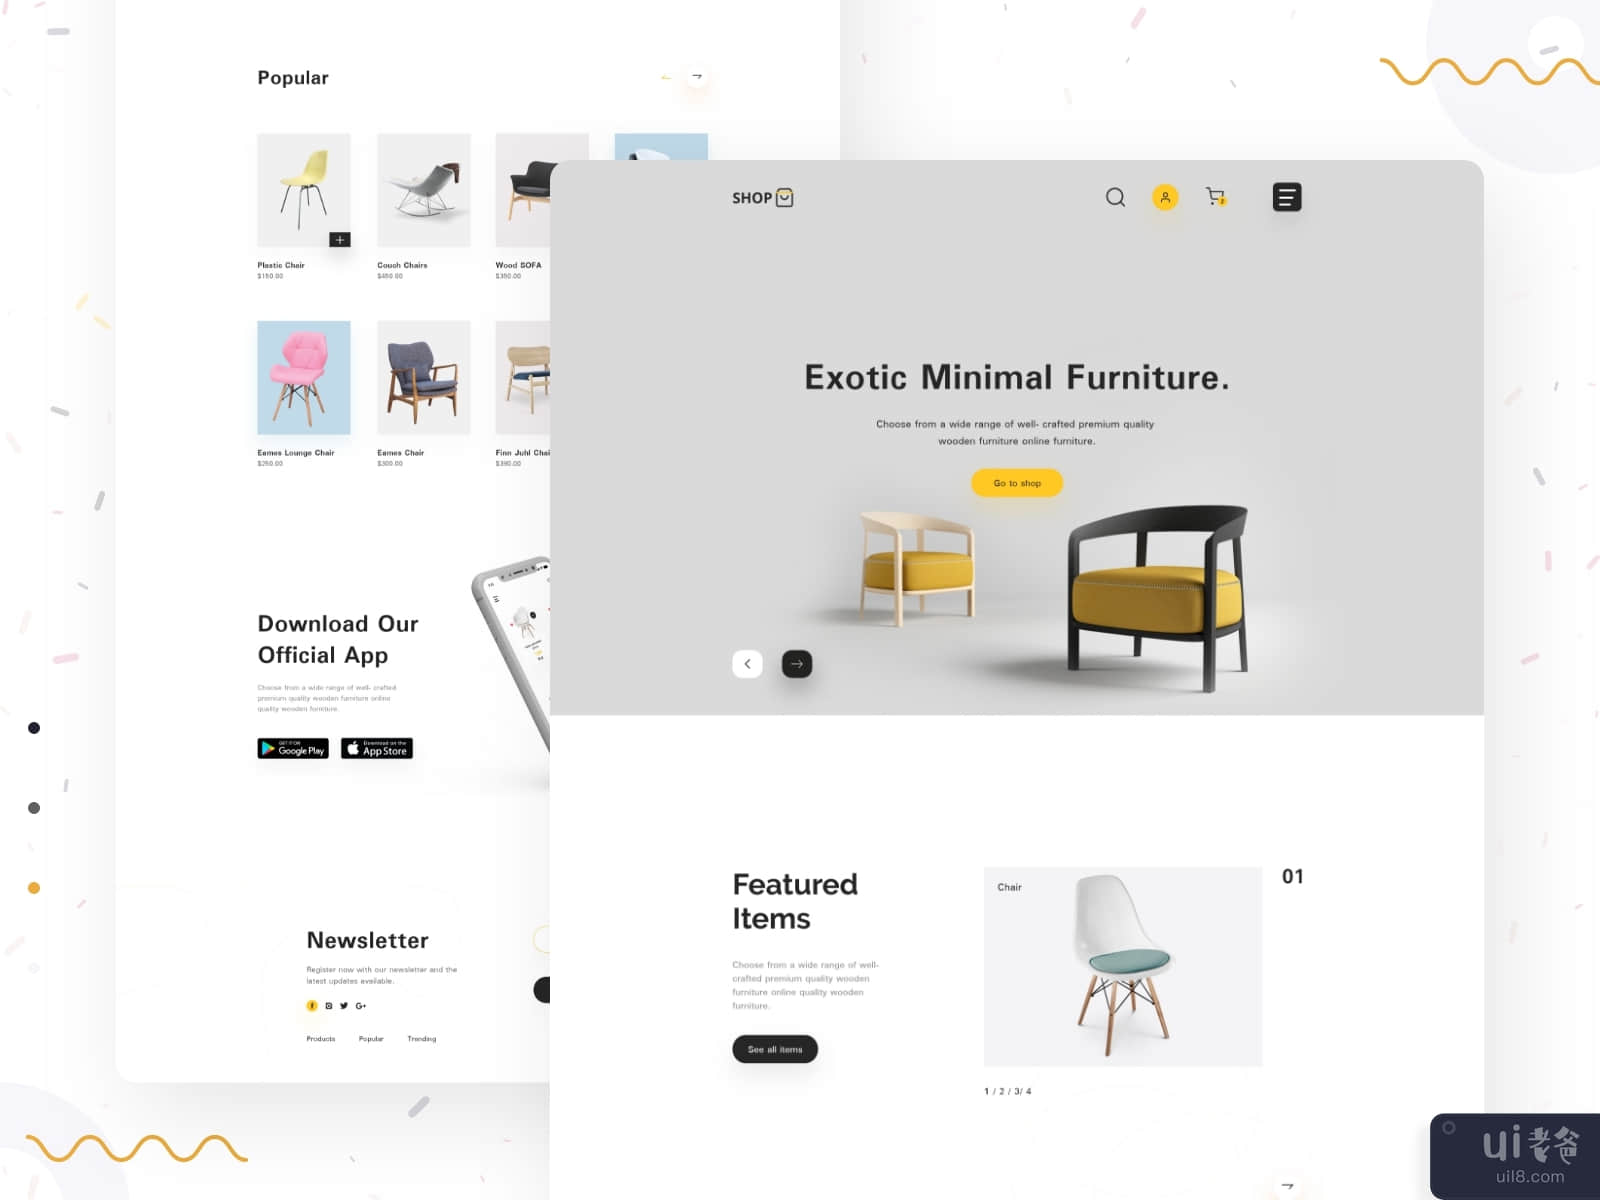 E-commerce Product Landing Page